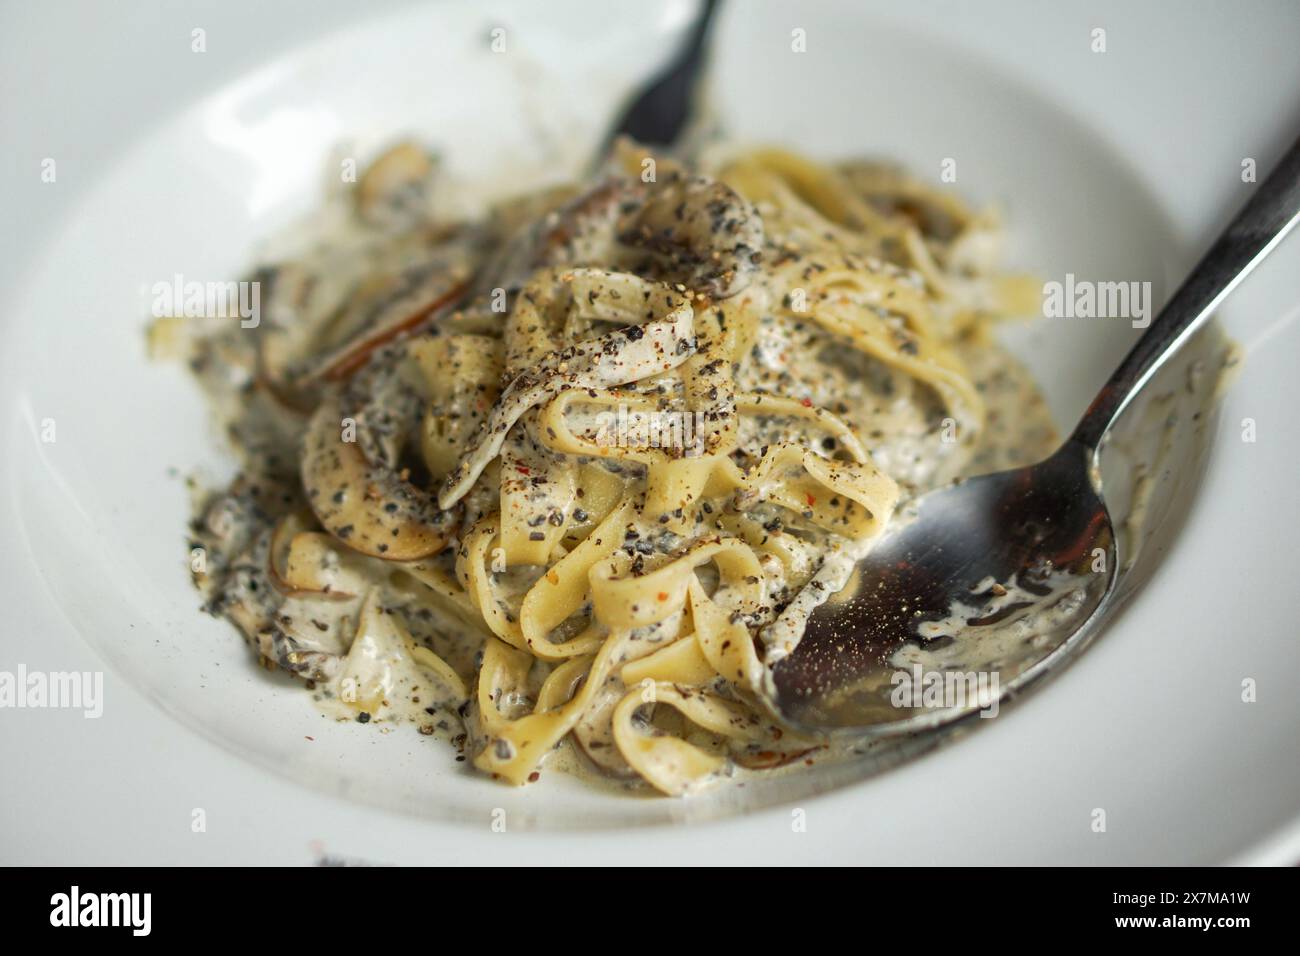 Truffle tagliatelle spaghetti, unique and earthy flavor of black truffles made simple way with pasta. Pasta plate in Argentina steakhouse restaurant. Stock Photo